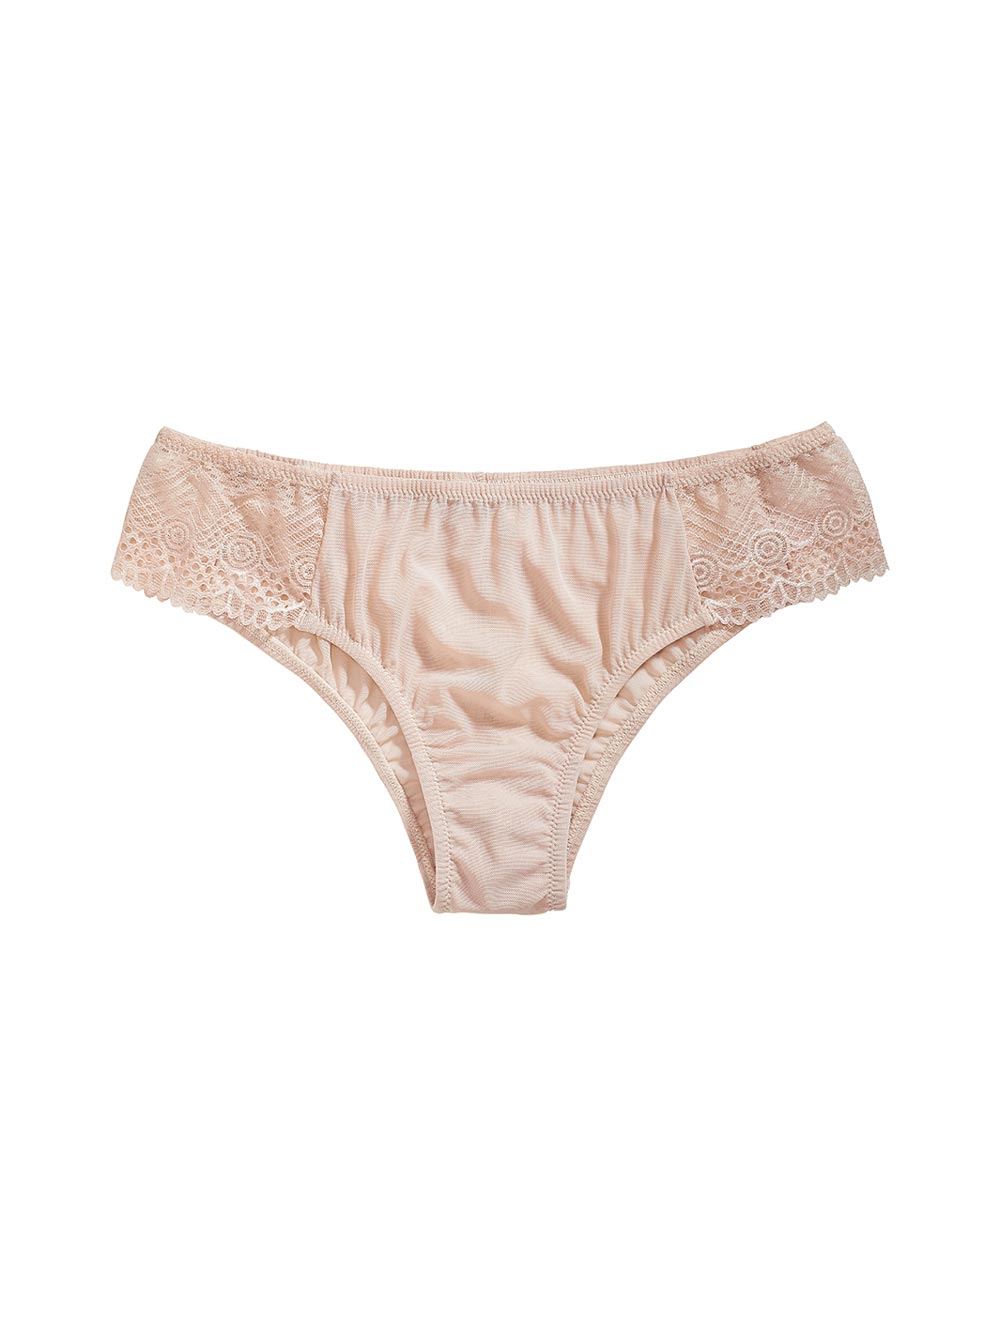 Ellie Full Coverage Lace Detail Panty